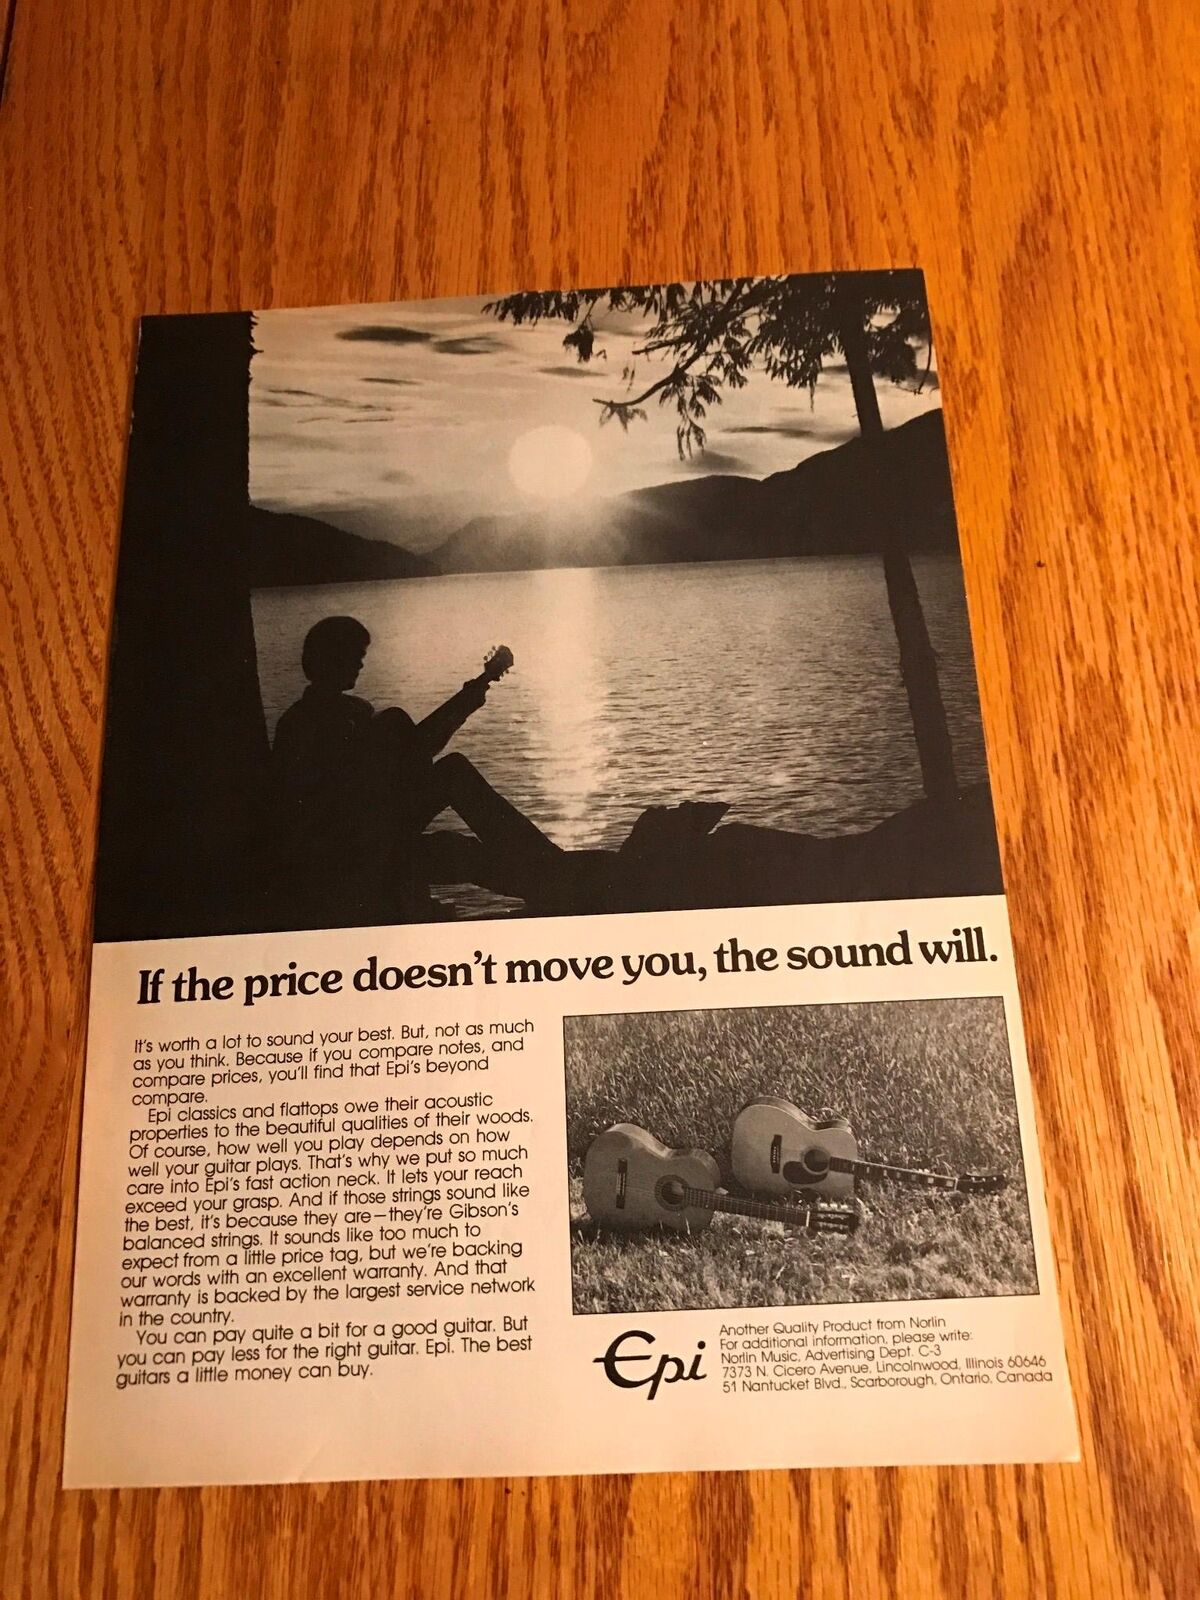 1978 VINTAGE 8X11 PRINT Ad for EPIPHONE GUITARS man playing by water sun setting